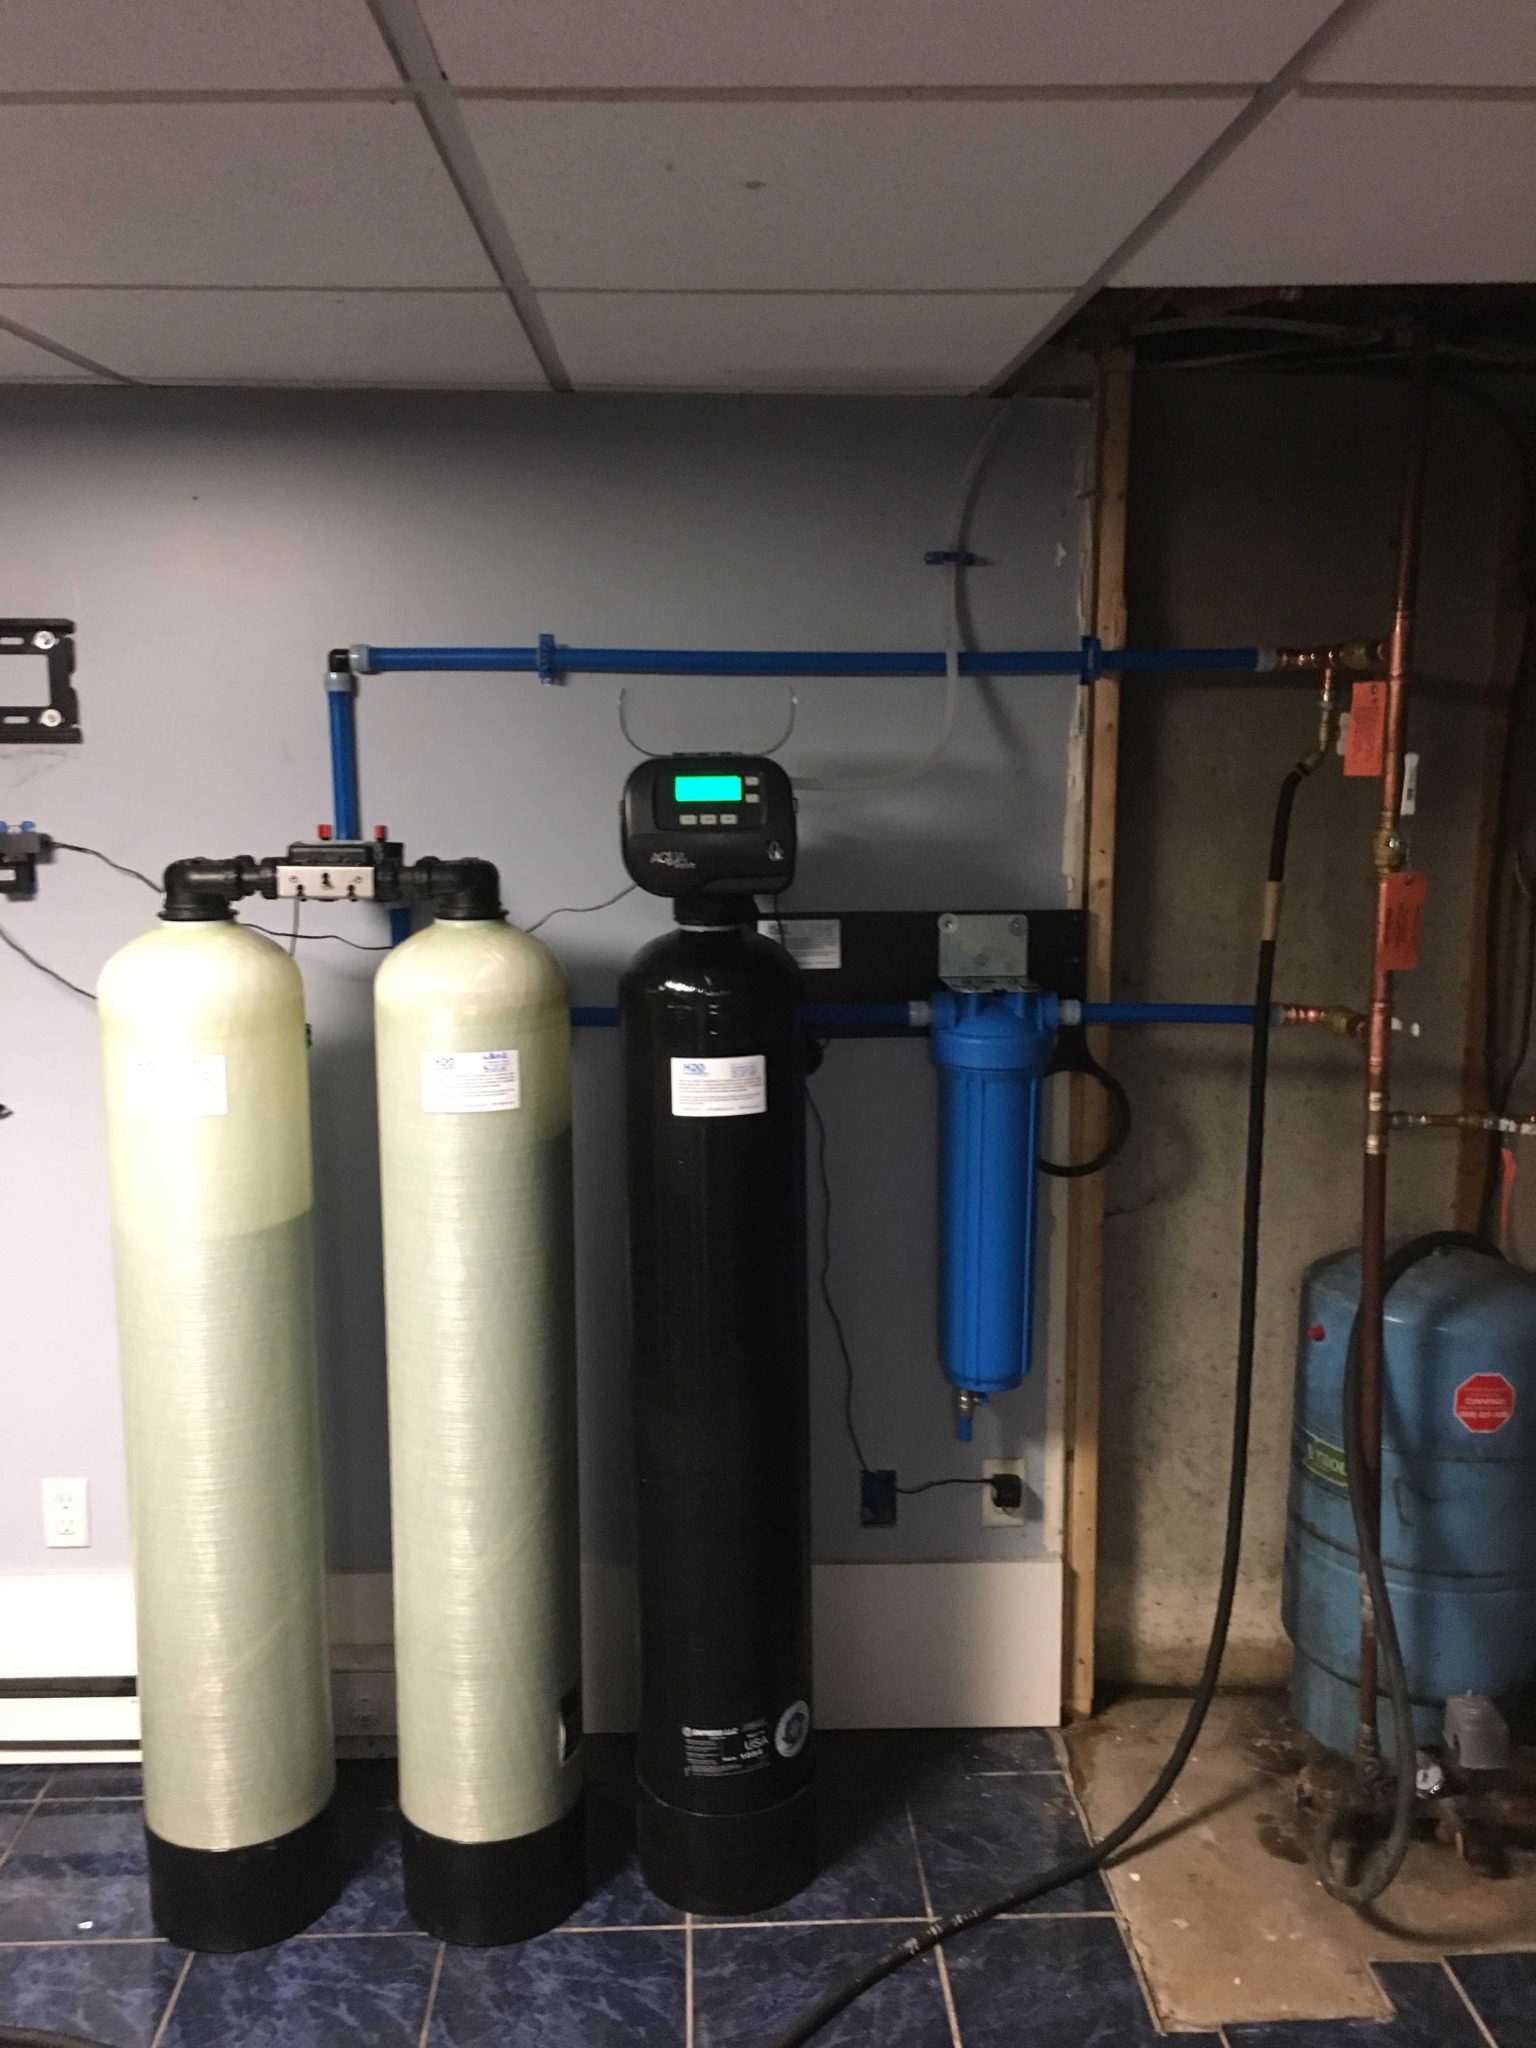 Whole house reverse osmosis filtration system installed to desalinate private well on coastal property experiencing saltwater intrusion.